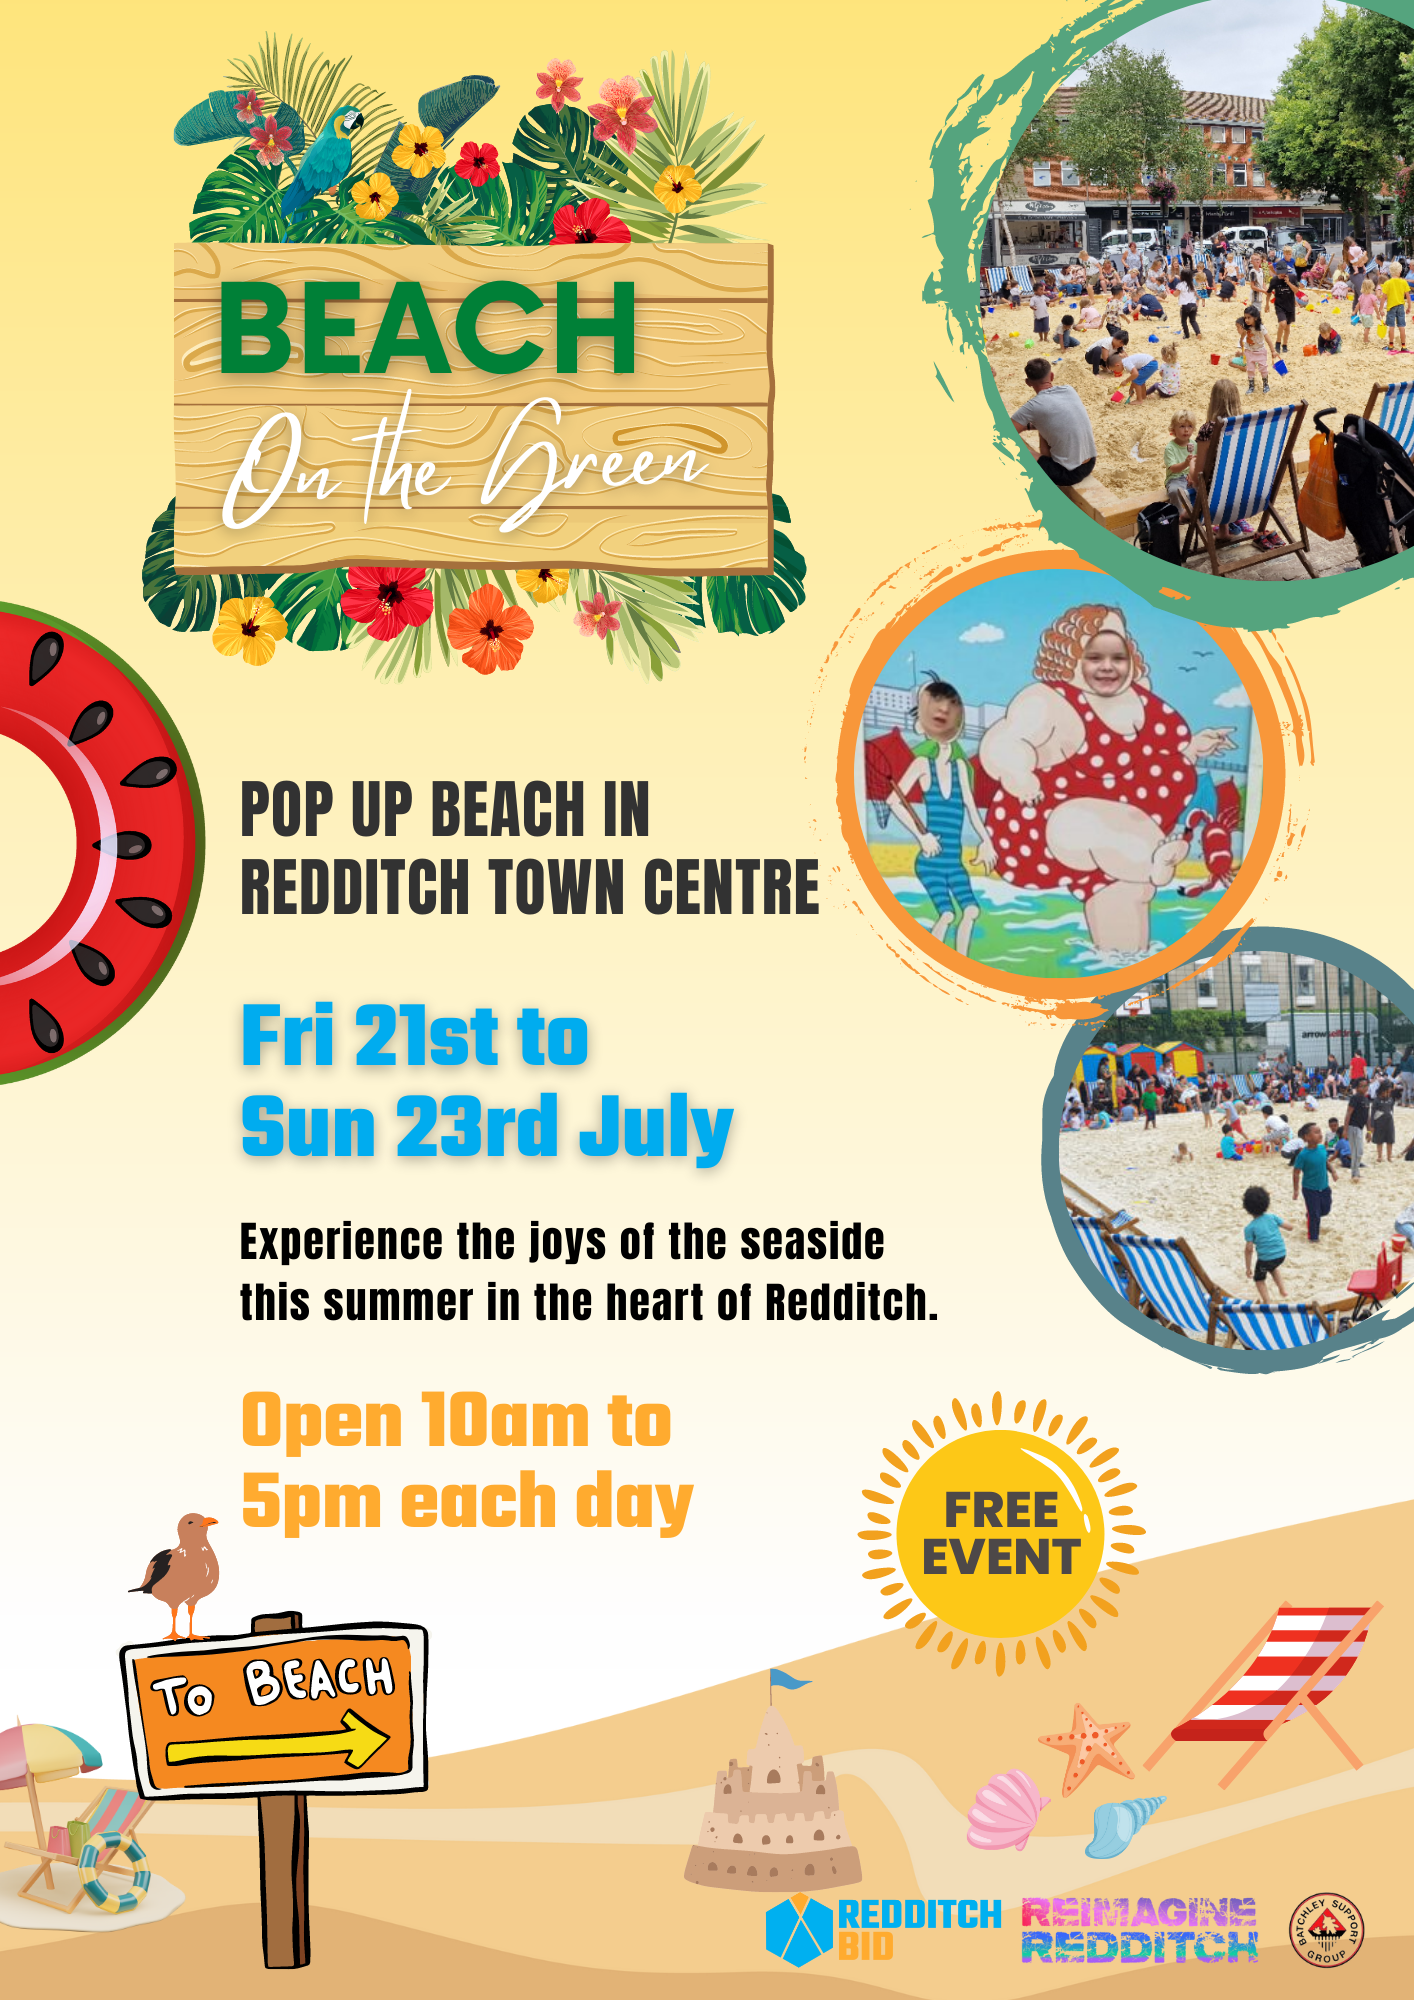 The seaside is coming to Redditch this summer